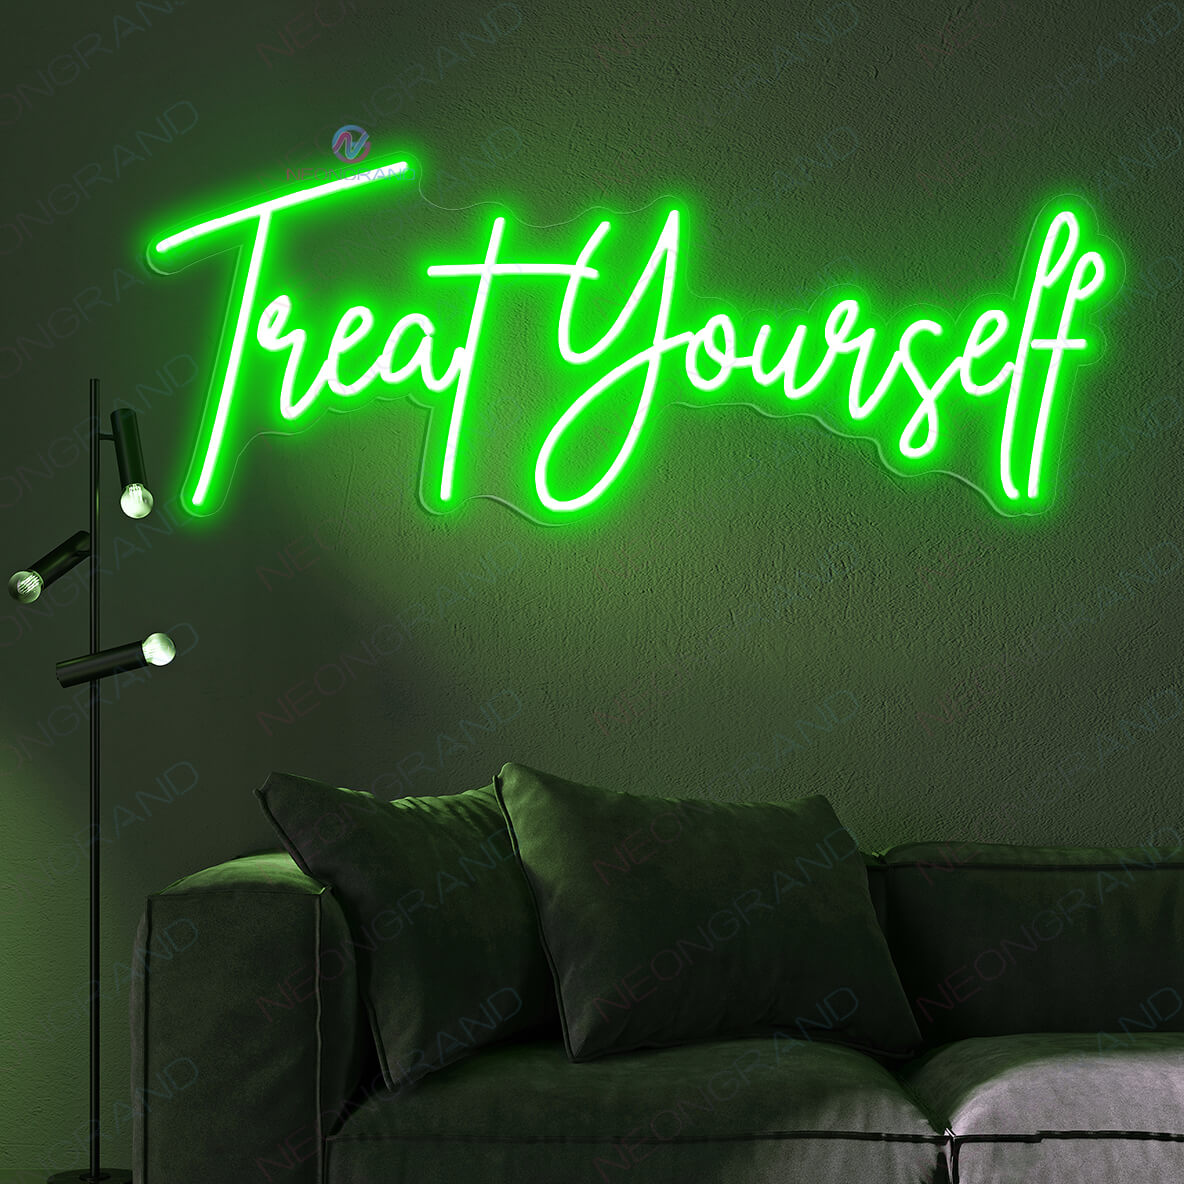 Treat Yourself Neon Sign Motivation Led Light green